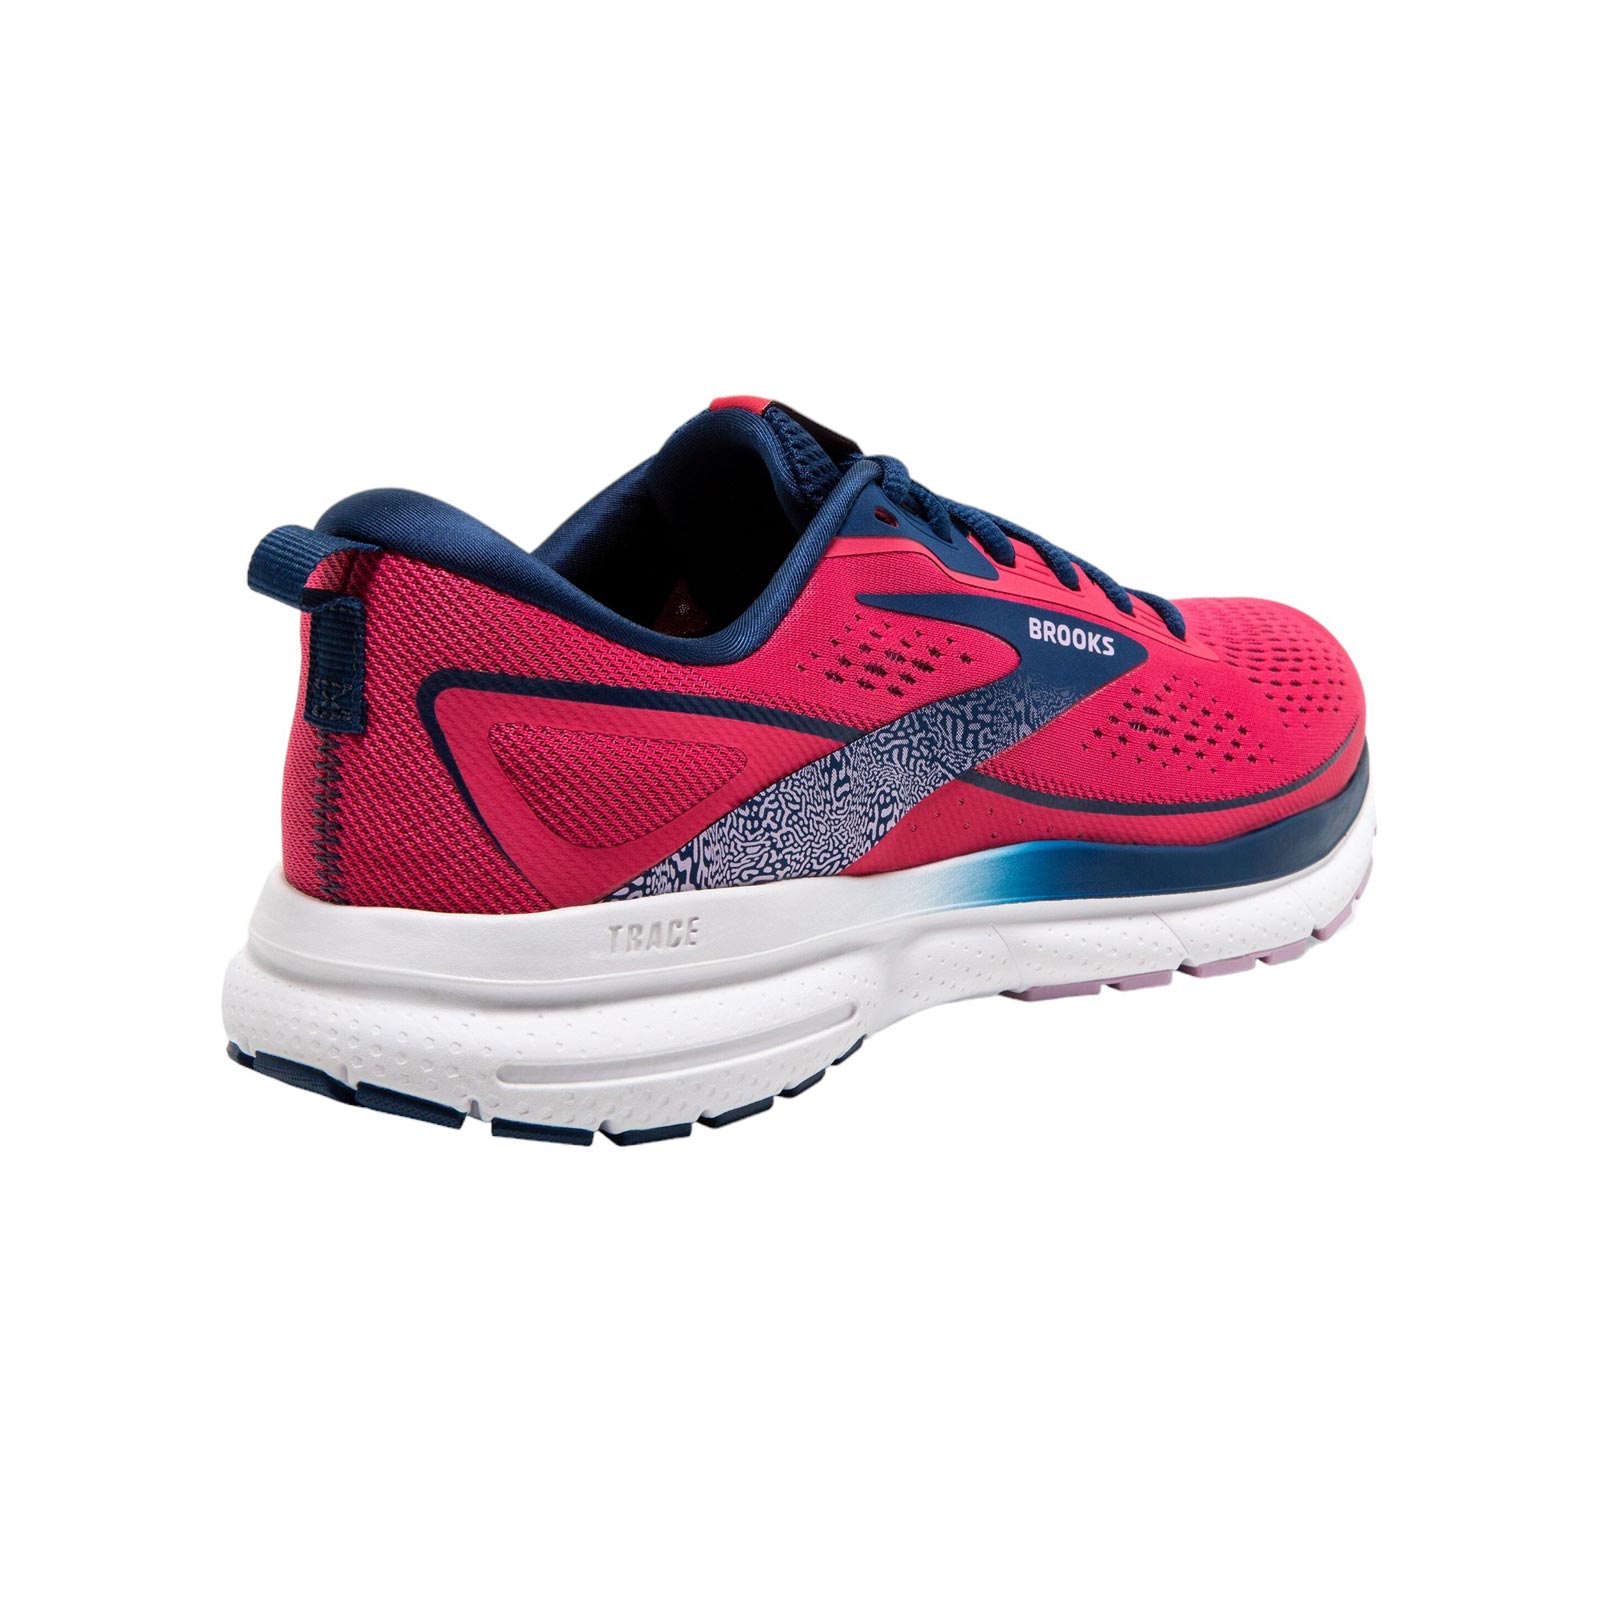 BROOKS TRACE 3 WOMENS RUNNING SHOES